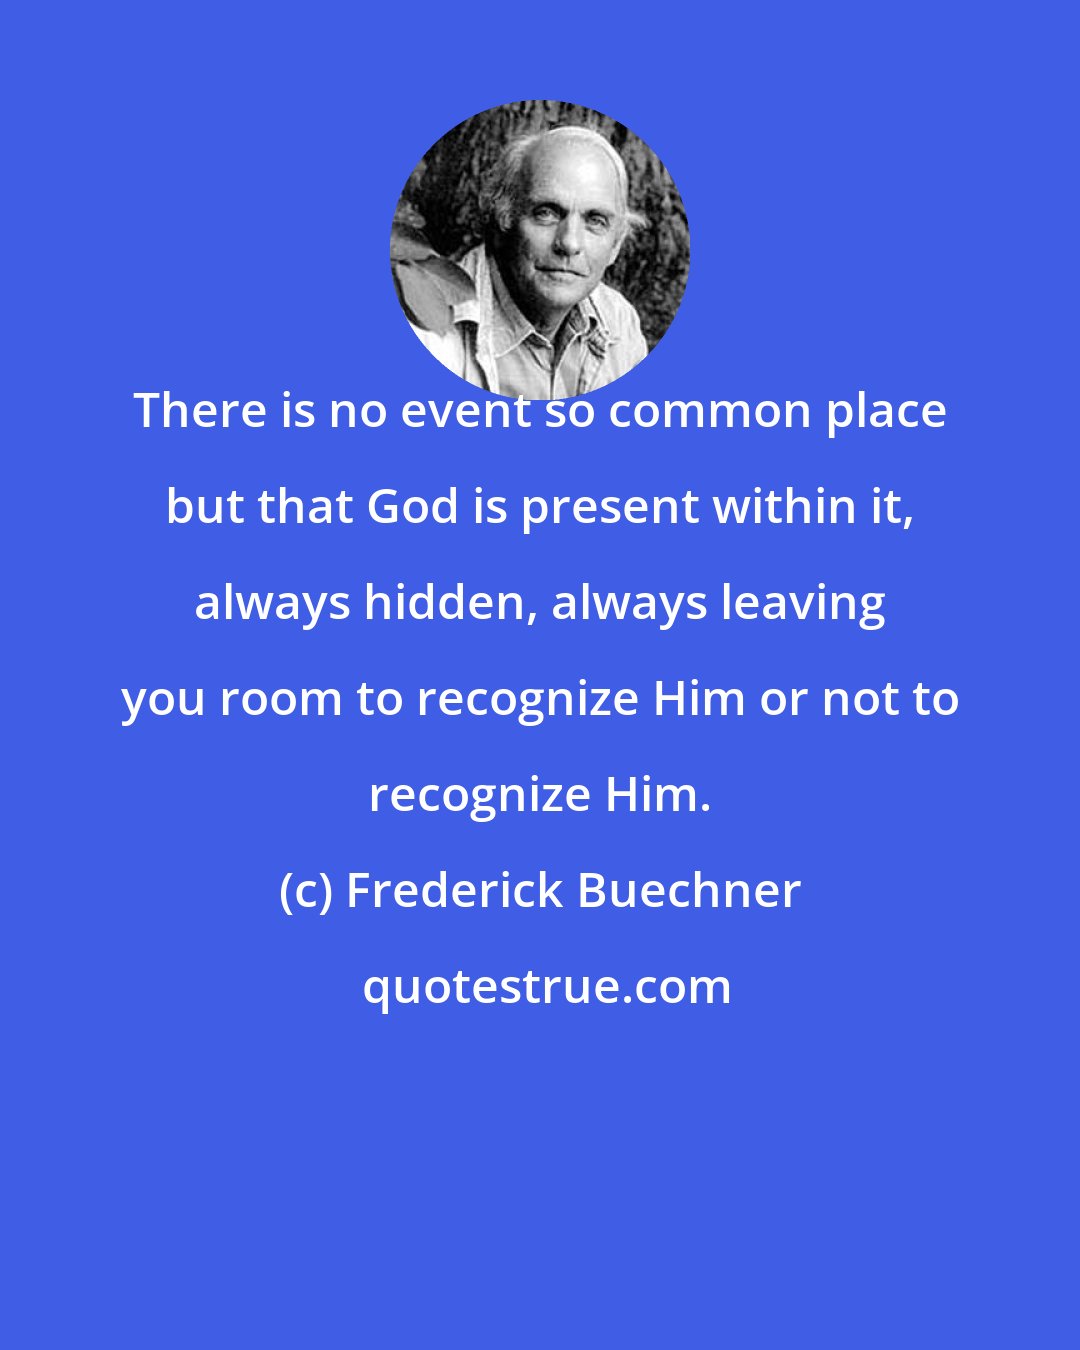 Frederick Buechner: There is no event so common place but that God is present within it, always hidden, always leaving you room to recognize Him or not to recognize Him.